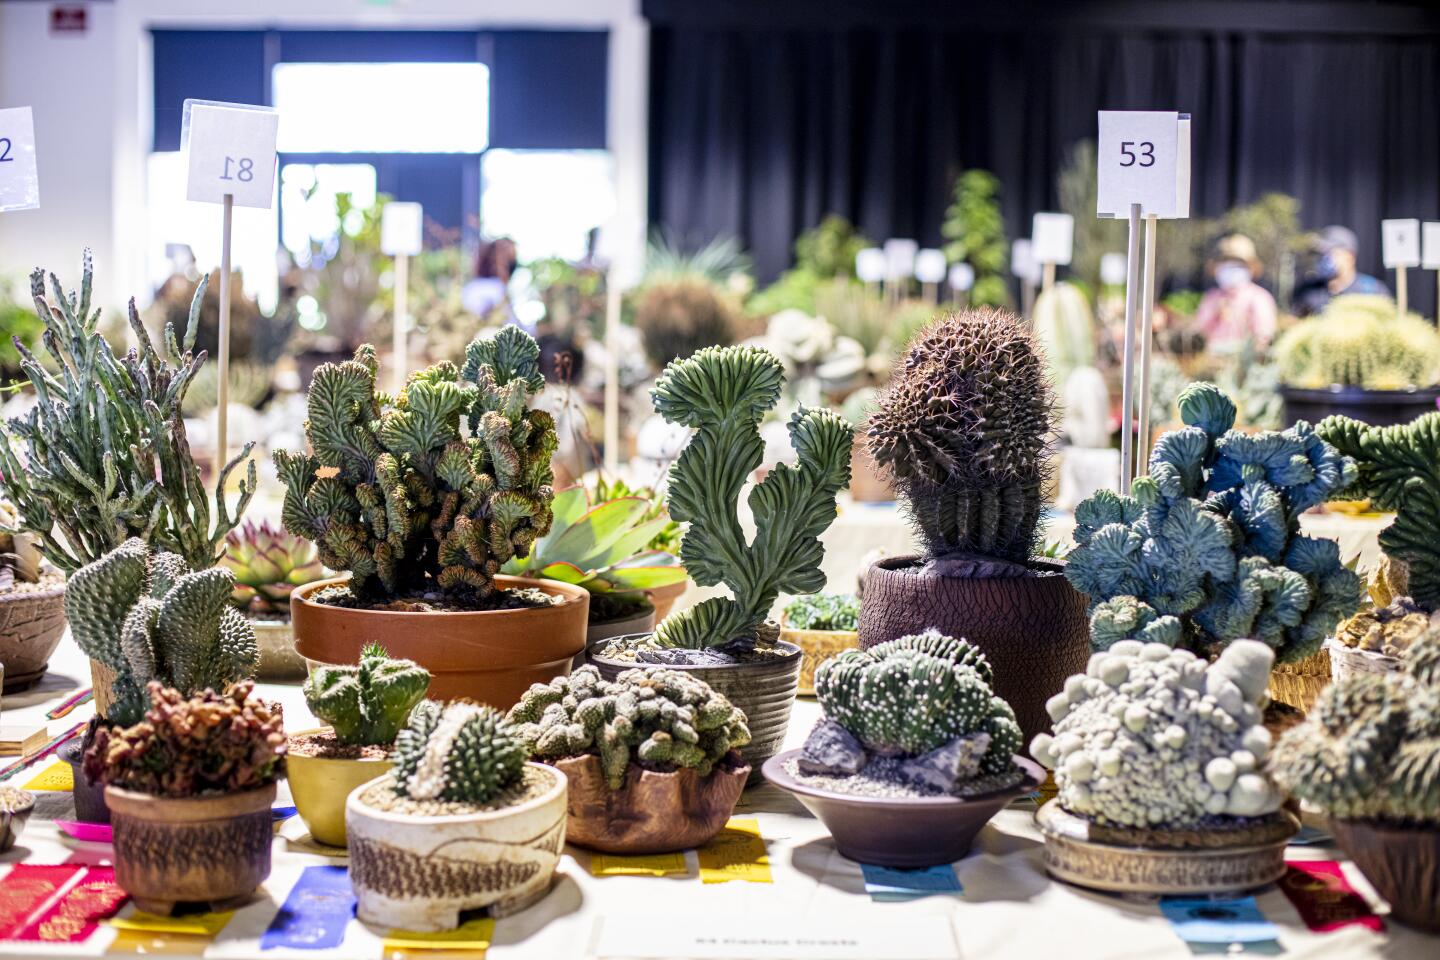 A small selection of the 1,300 succulents on display during the 35th Inter-City Cactus and Succulent Show and Sale at the Arboretum in Arcadia.